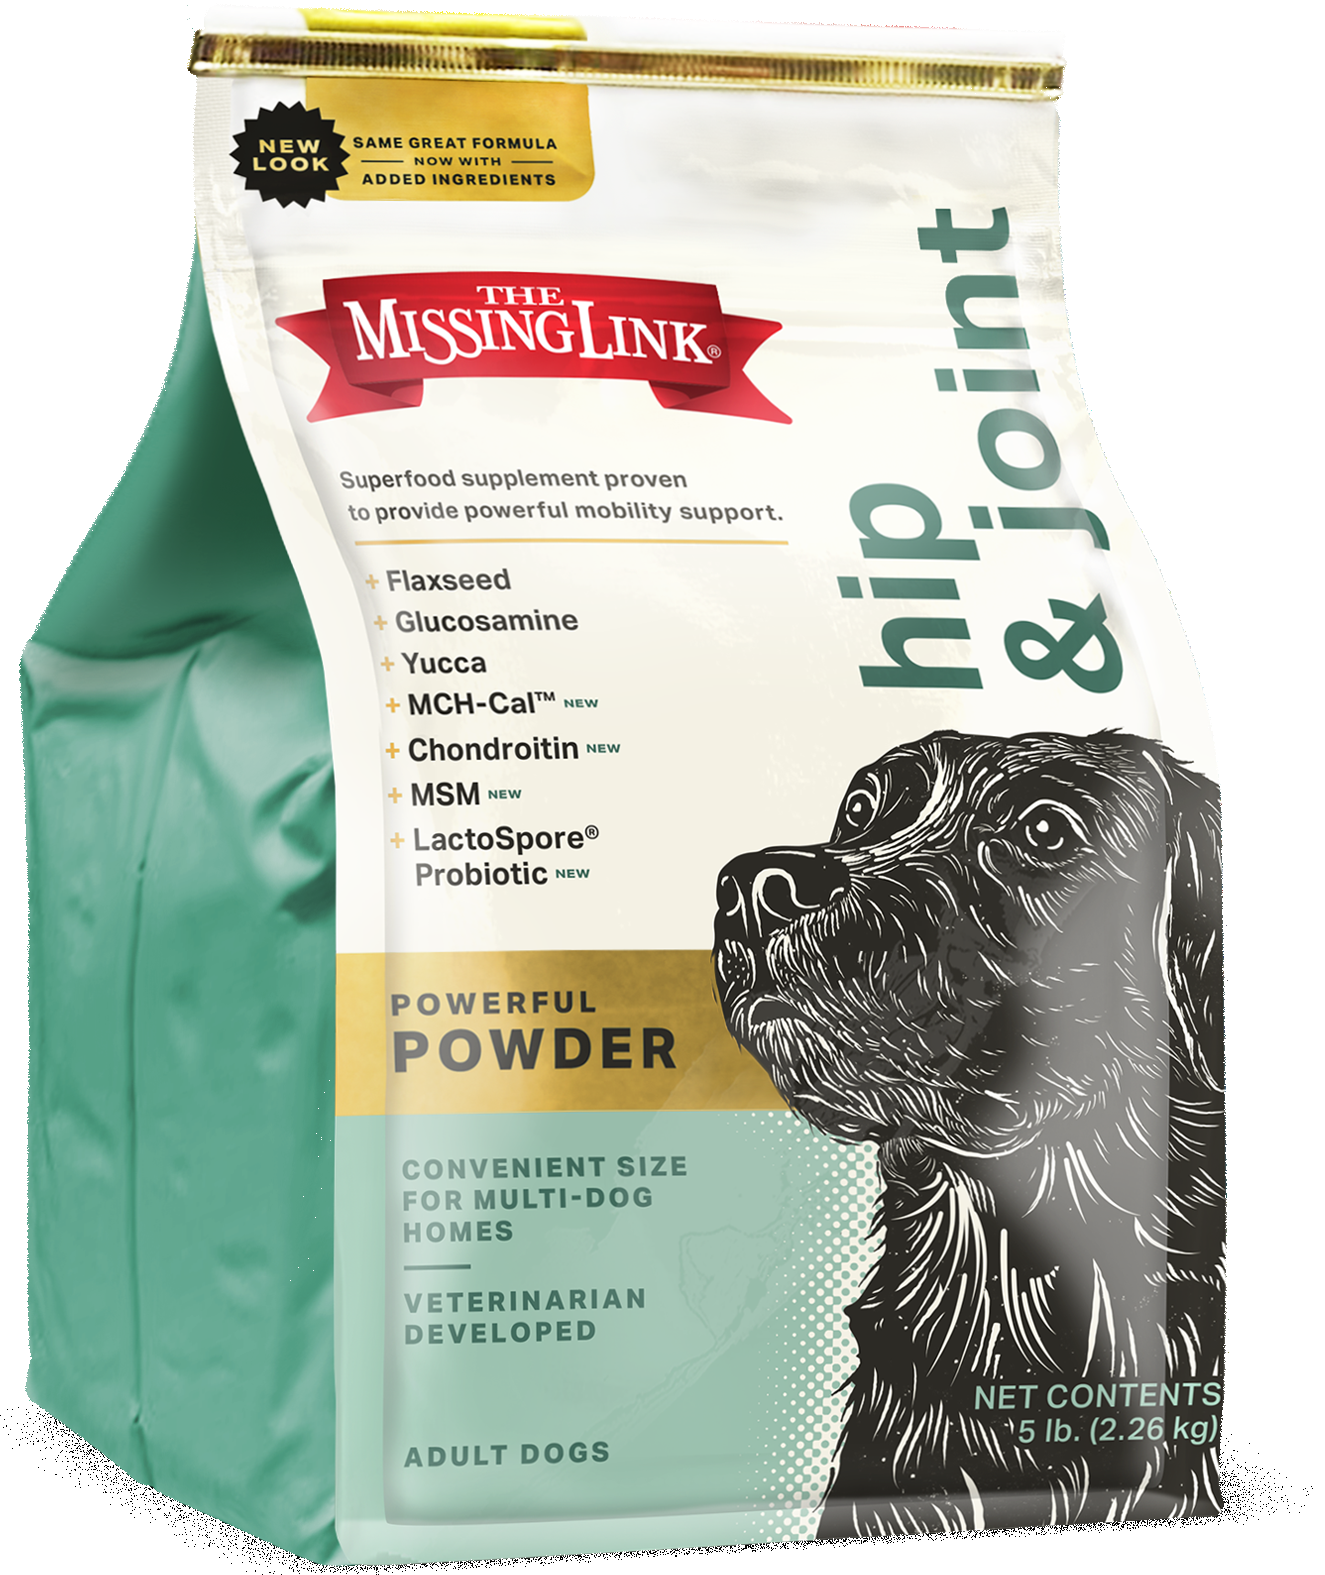 5 pound bag of The Missing Link's hip & joint powerful powder.